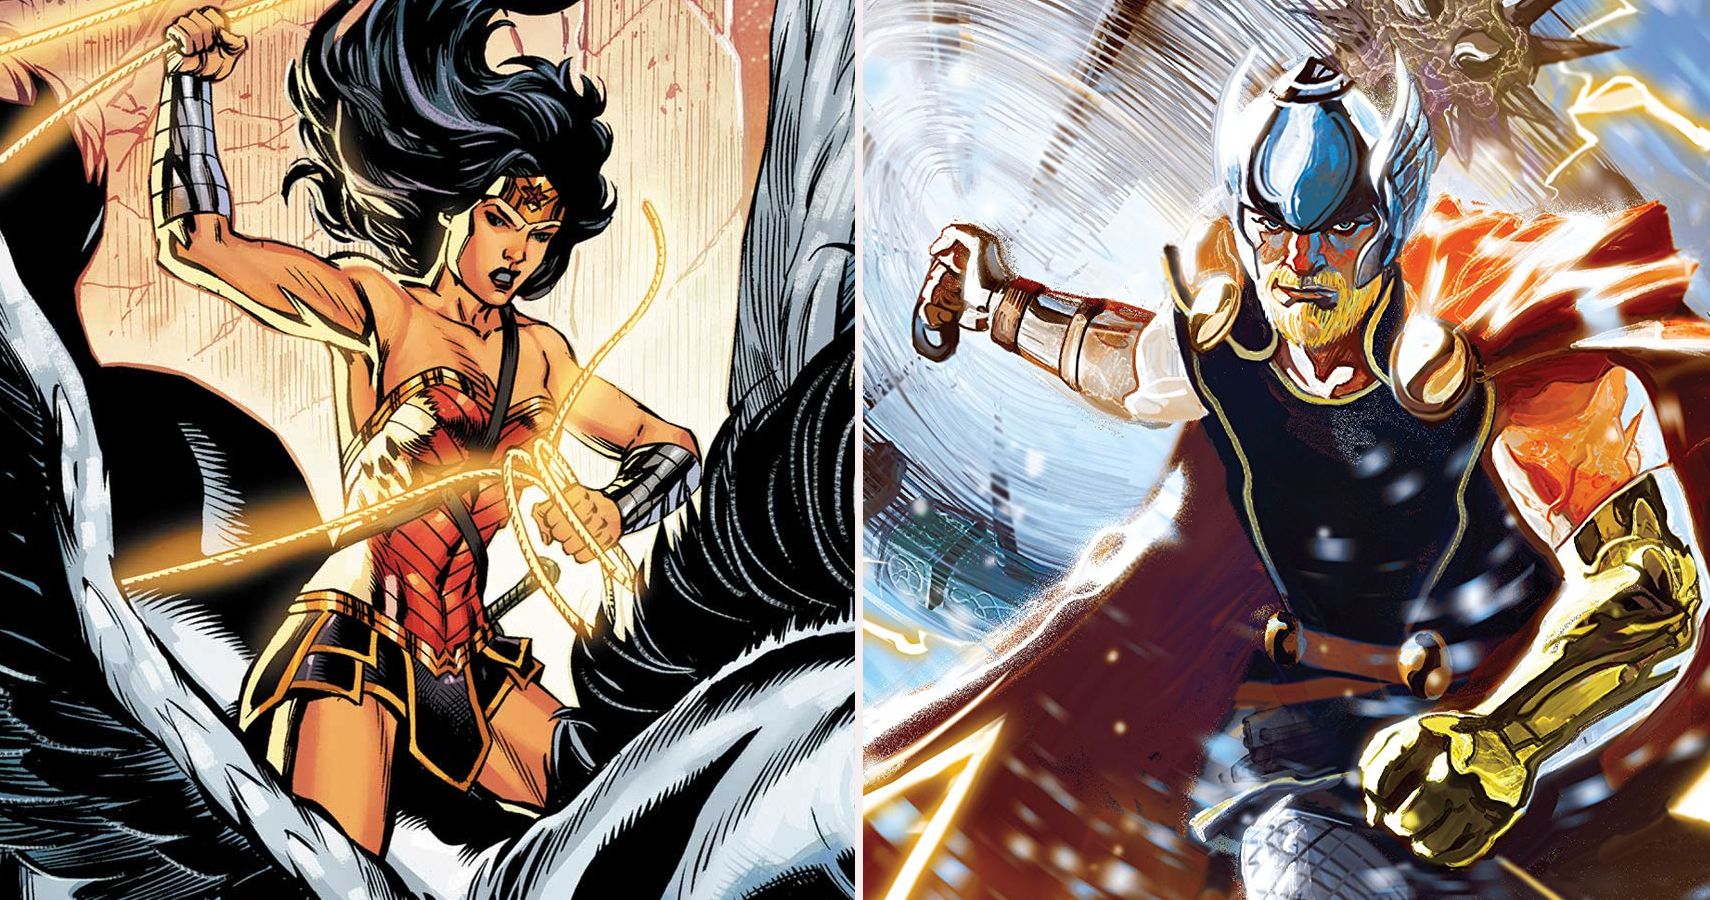 Wonder Woman Vs Thor: Who Is Really The Stronger God?